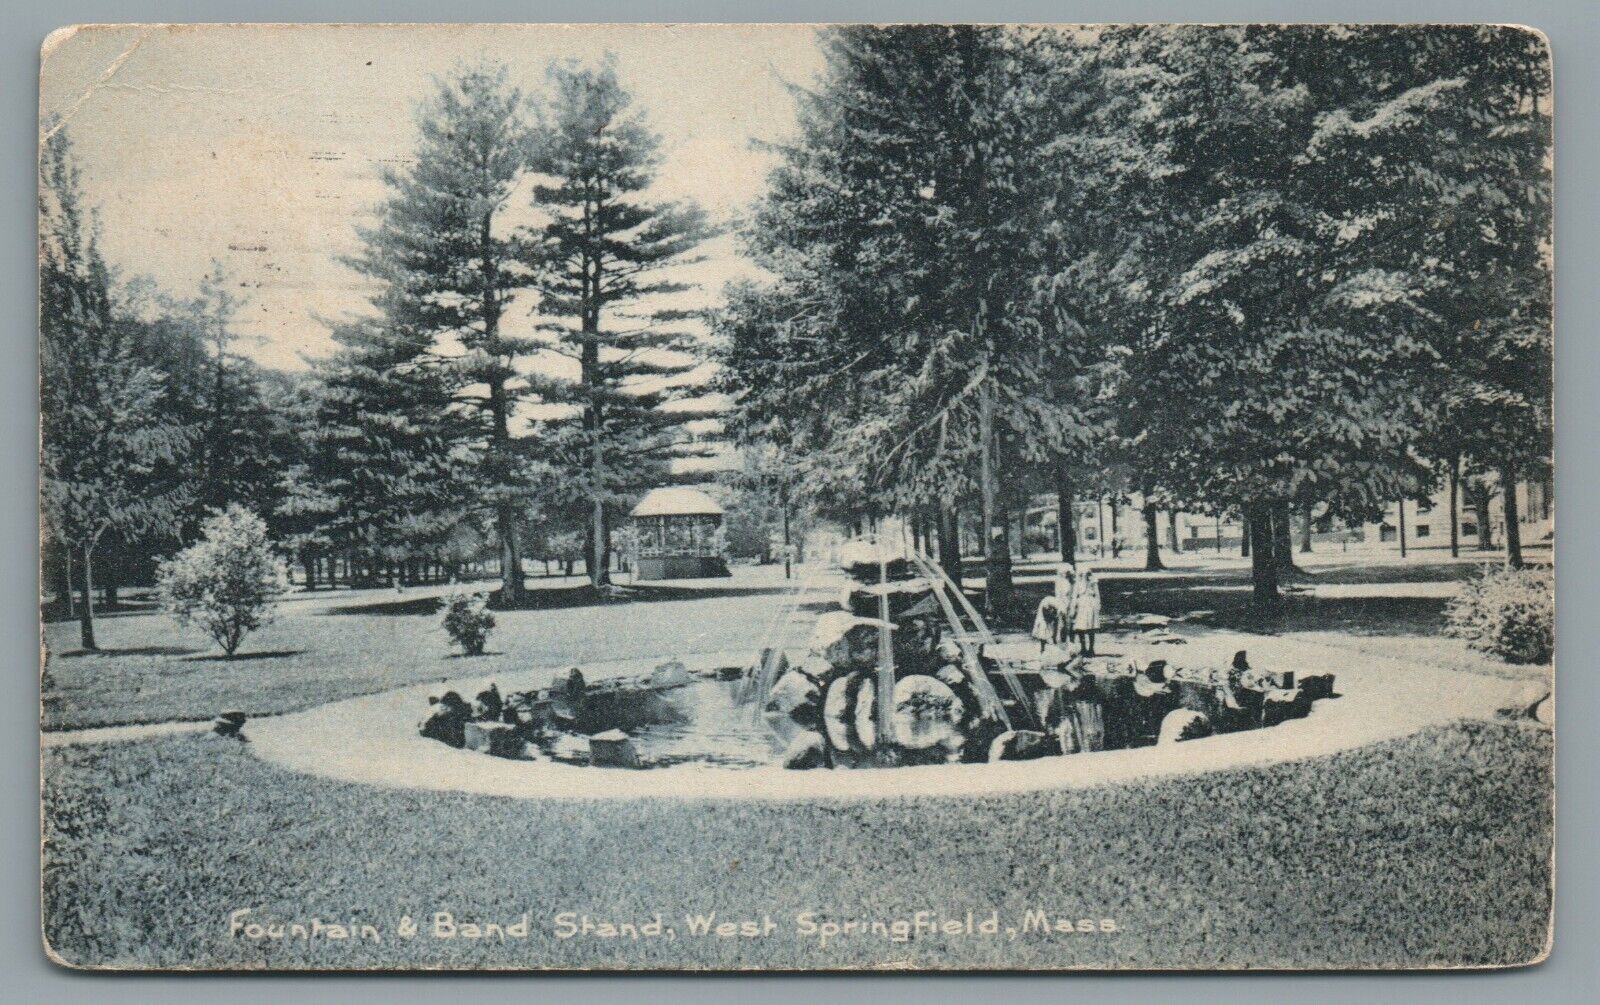 Fountain & Band Stand West Springfield Mass Vintage Postcard c1909